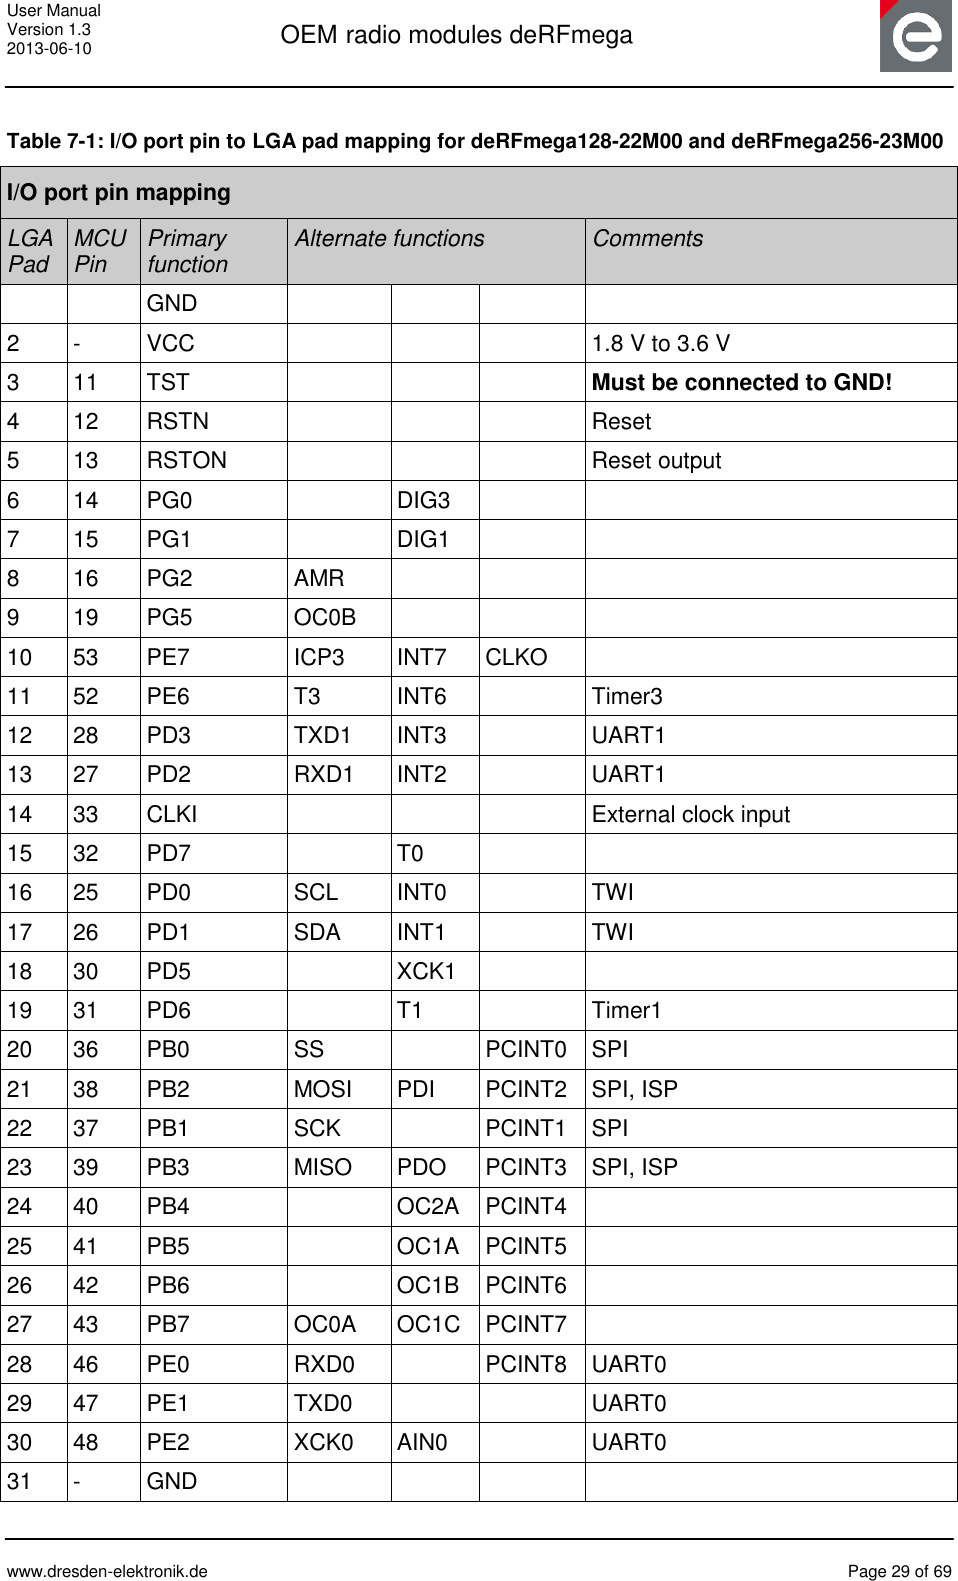 User Manual Version 1.3 2013-06-10  OEM radio modules deRFmega      www.dresden-elektronik.de  Page 29 of 69   Table 7-1: I/O port pin to LGA pad mapping for deRFmega128-22M00 and deRFmega256-23M00 I/O port pin mapping LGA Pad MCU Pin Primary function Alternate functions Comments   GND     2 - VCC    1.8 V to 3.6 V 3 11 TST    Must be connected to GND! 4 12 RSTN    Reset 5 13 RSTON    Reset output 6 14 PG0  DIG3   7 15 PG1  DIG1   8 16 PG2 AMR    9 19 PG5 OC0B    10 53 PE7 ICP3 INT7 CLKO  11 52 PE6 T3 INT6  Timer3 12 28 PD3 TXD1 INT3  UART1 13 27 PD2 RXD1 INT2  UART1 14 33 CLKI    External clock input 15 32 PD7  T0   16 25 PD0 SCL INT0  TWI 17 26 PD1 SDA INT1  TWI 18 30 PD5  XCK1   19 31 PD6  T1  Timer1 20 36 PB0 SS  PCINT0 SPI 21 38 PB2 MOSI PDI PCINT2 SPI, ISP 22 37 PB1 SCK  PCINT1 SPI 23 39 PB3 MISO PDO PCINT3 SPI, ISP 24 40 PB4  OC2A PCINT4  25 41 PB5  OC1A PCINT5  26 42 PB6   OC1B PCINT6  27 43 PB7 OC0A OC1C PCINT7  28 46 PE0 RXD0  PCINT8 UART0 29 47 PE1 TXD0   UART0 30 48 PE2 XCK0 AIN0  UART0 31 - GND     